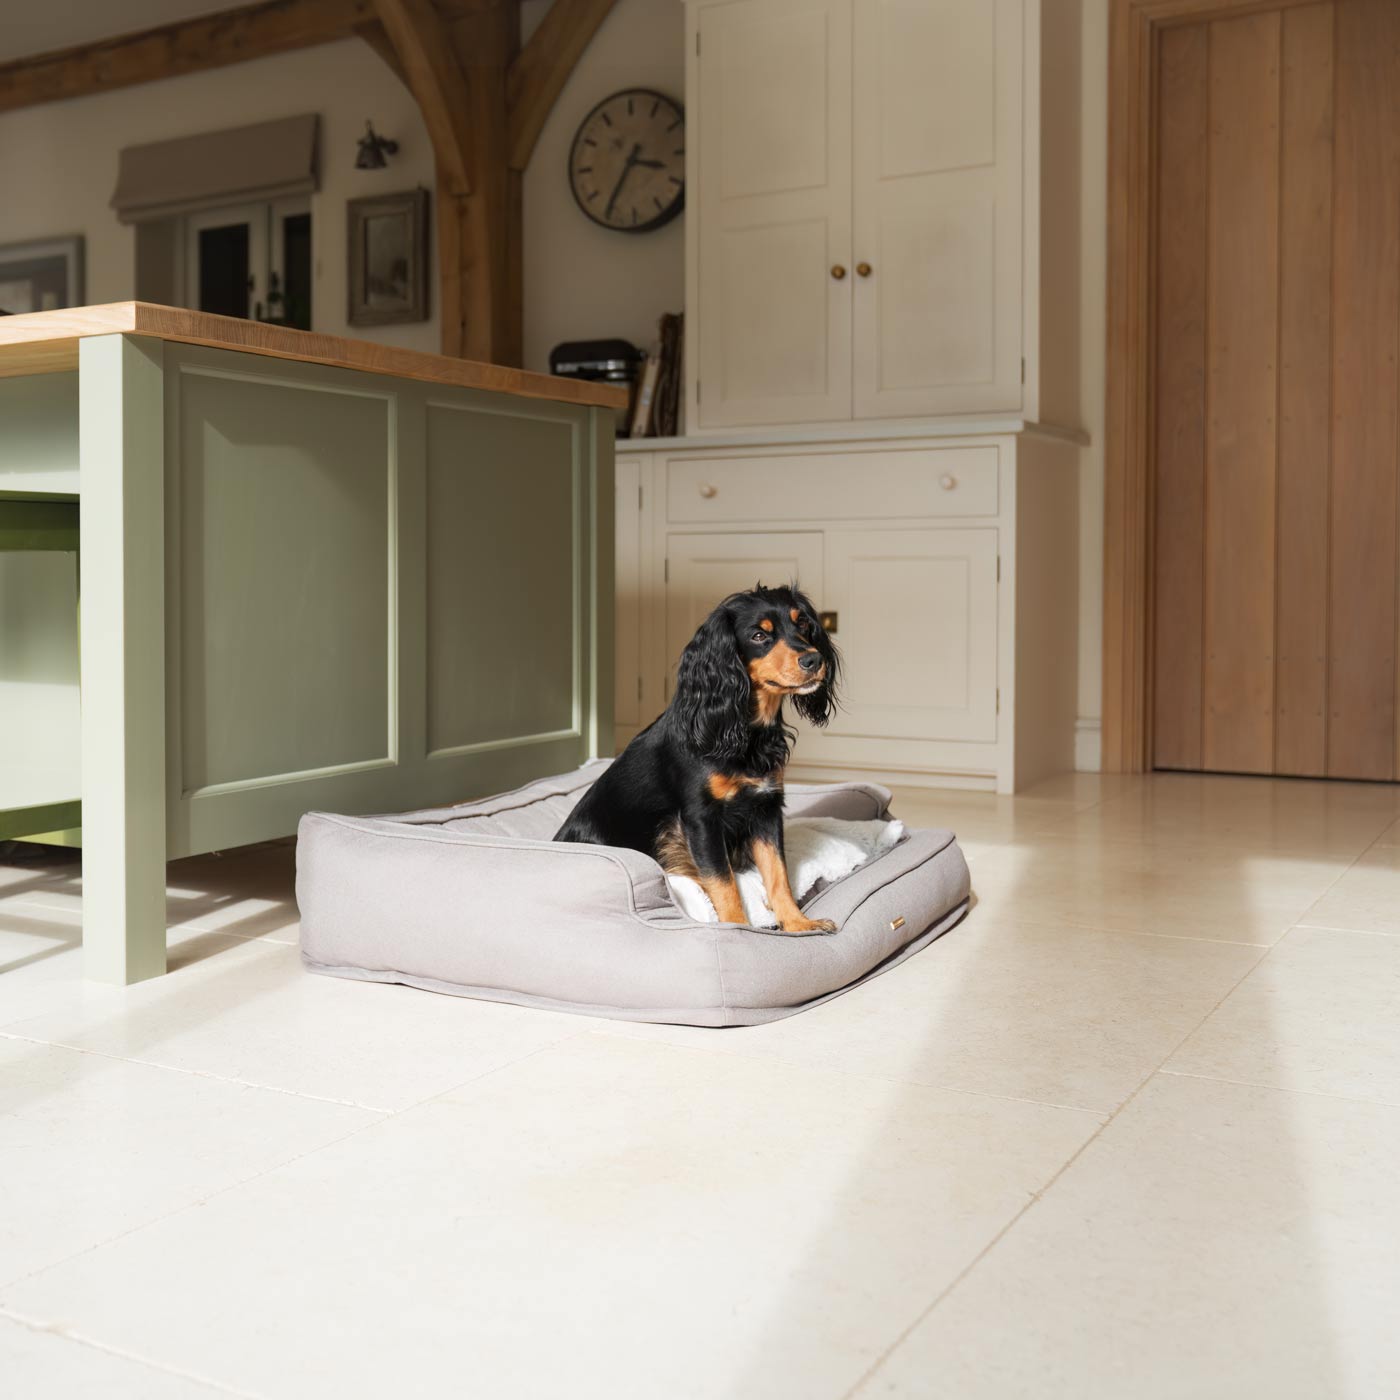 Present Your Furry Friend with the Perfect Dog Bed for The Ultimate Pet Nap-Time! Discover Our Luxury Deep Sleep Dog Bed In Stunning Putty! Available Now at Lords & Labradors US